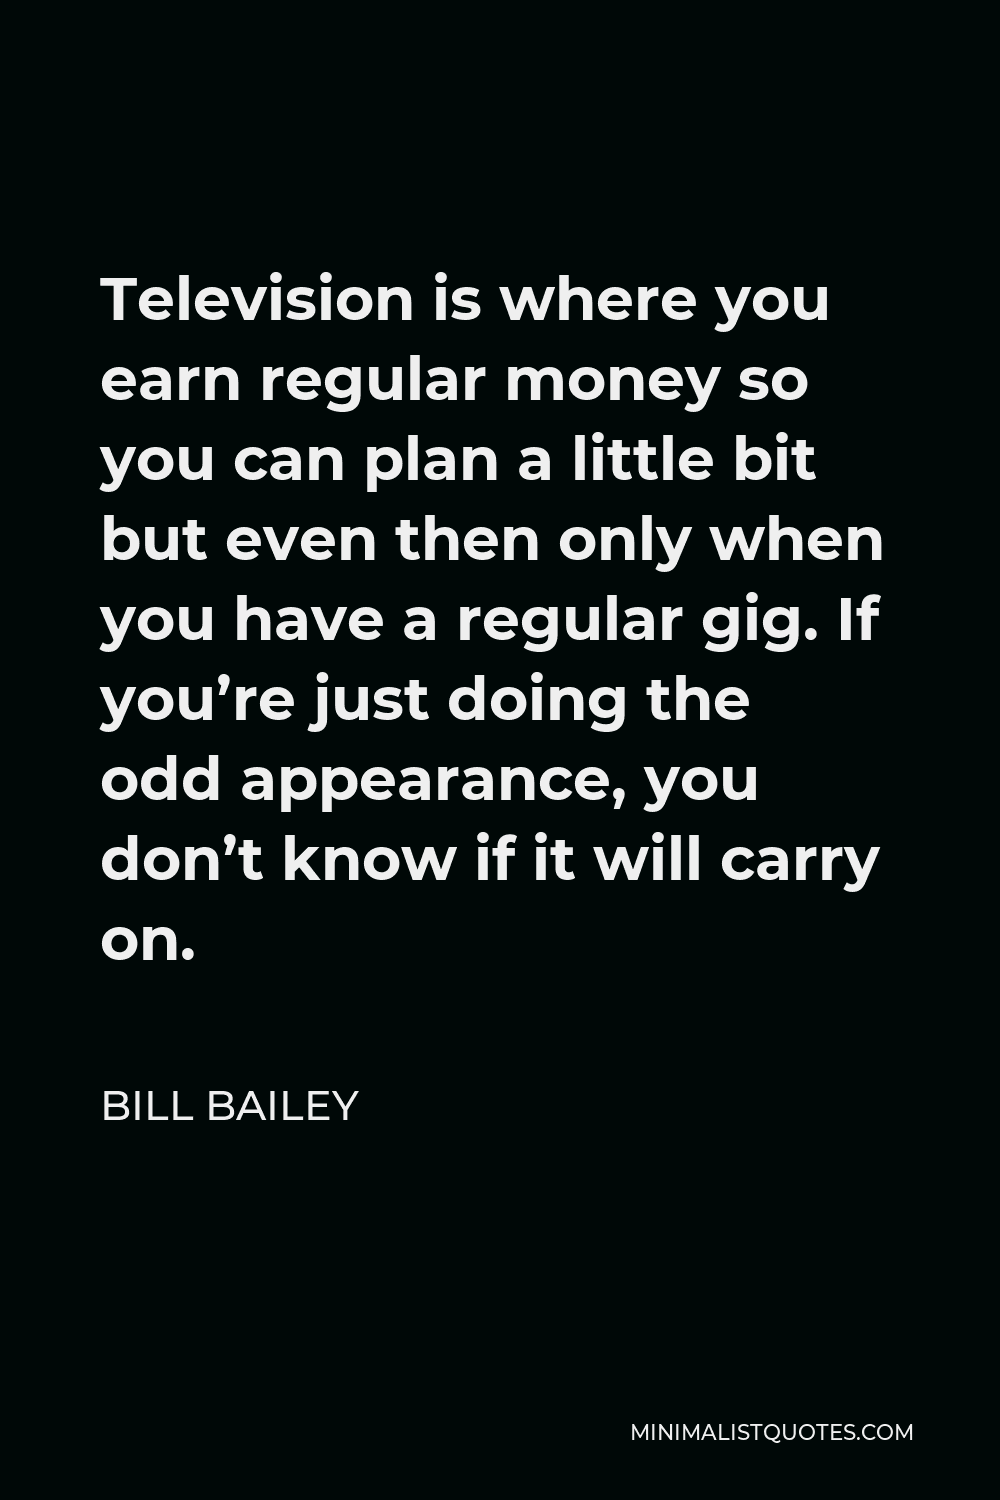 Bill Bailey Quote - Television is where you earn regular money so you can plan a little bit but even then only when you have a regular gig. If you’re just doing the odd appearance, you don’t know if it will carry on.